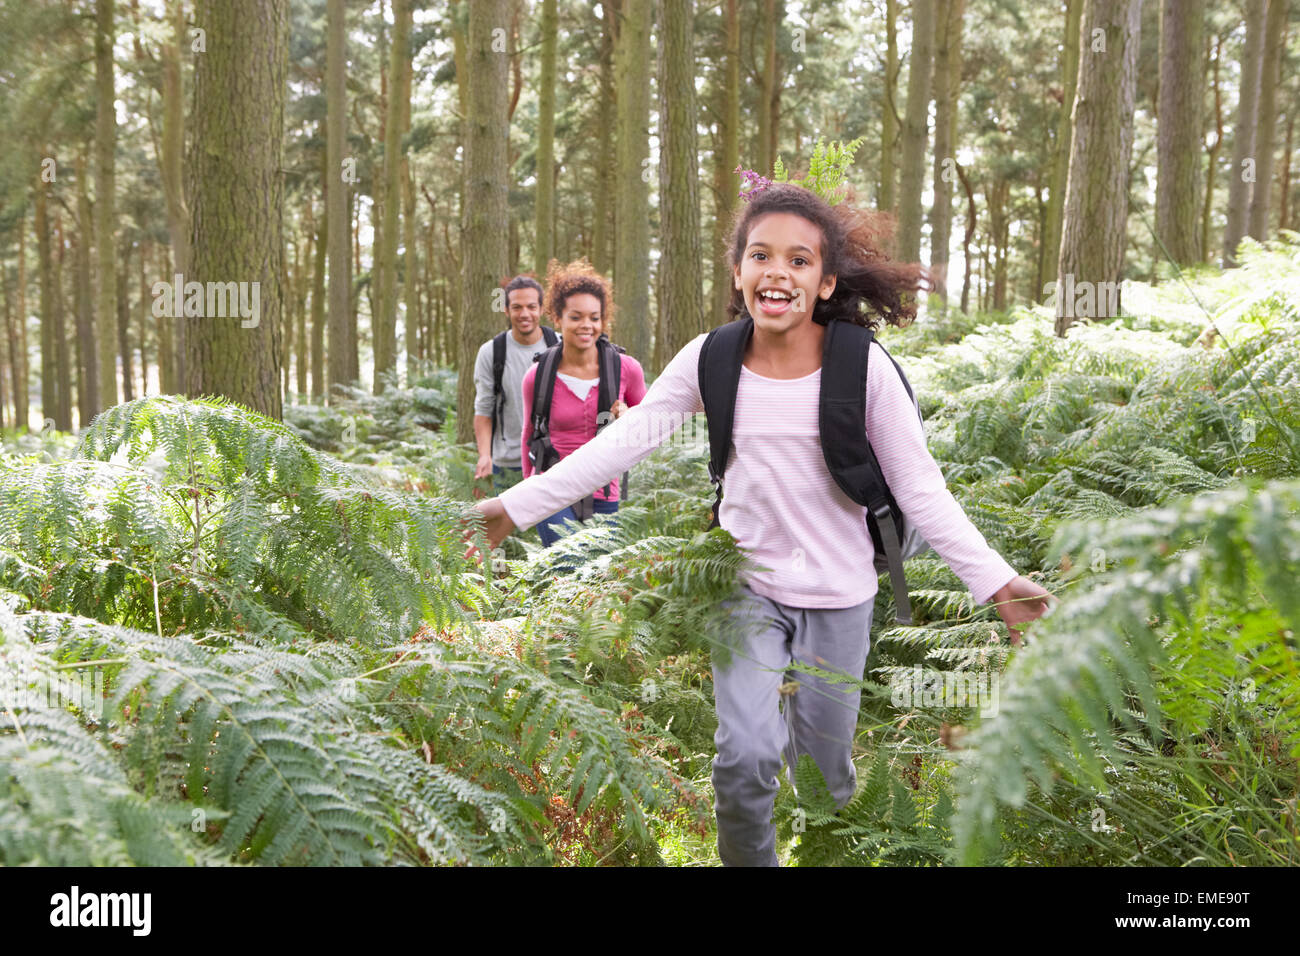 Family Group Hiking In Woods Together Stock Photo